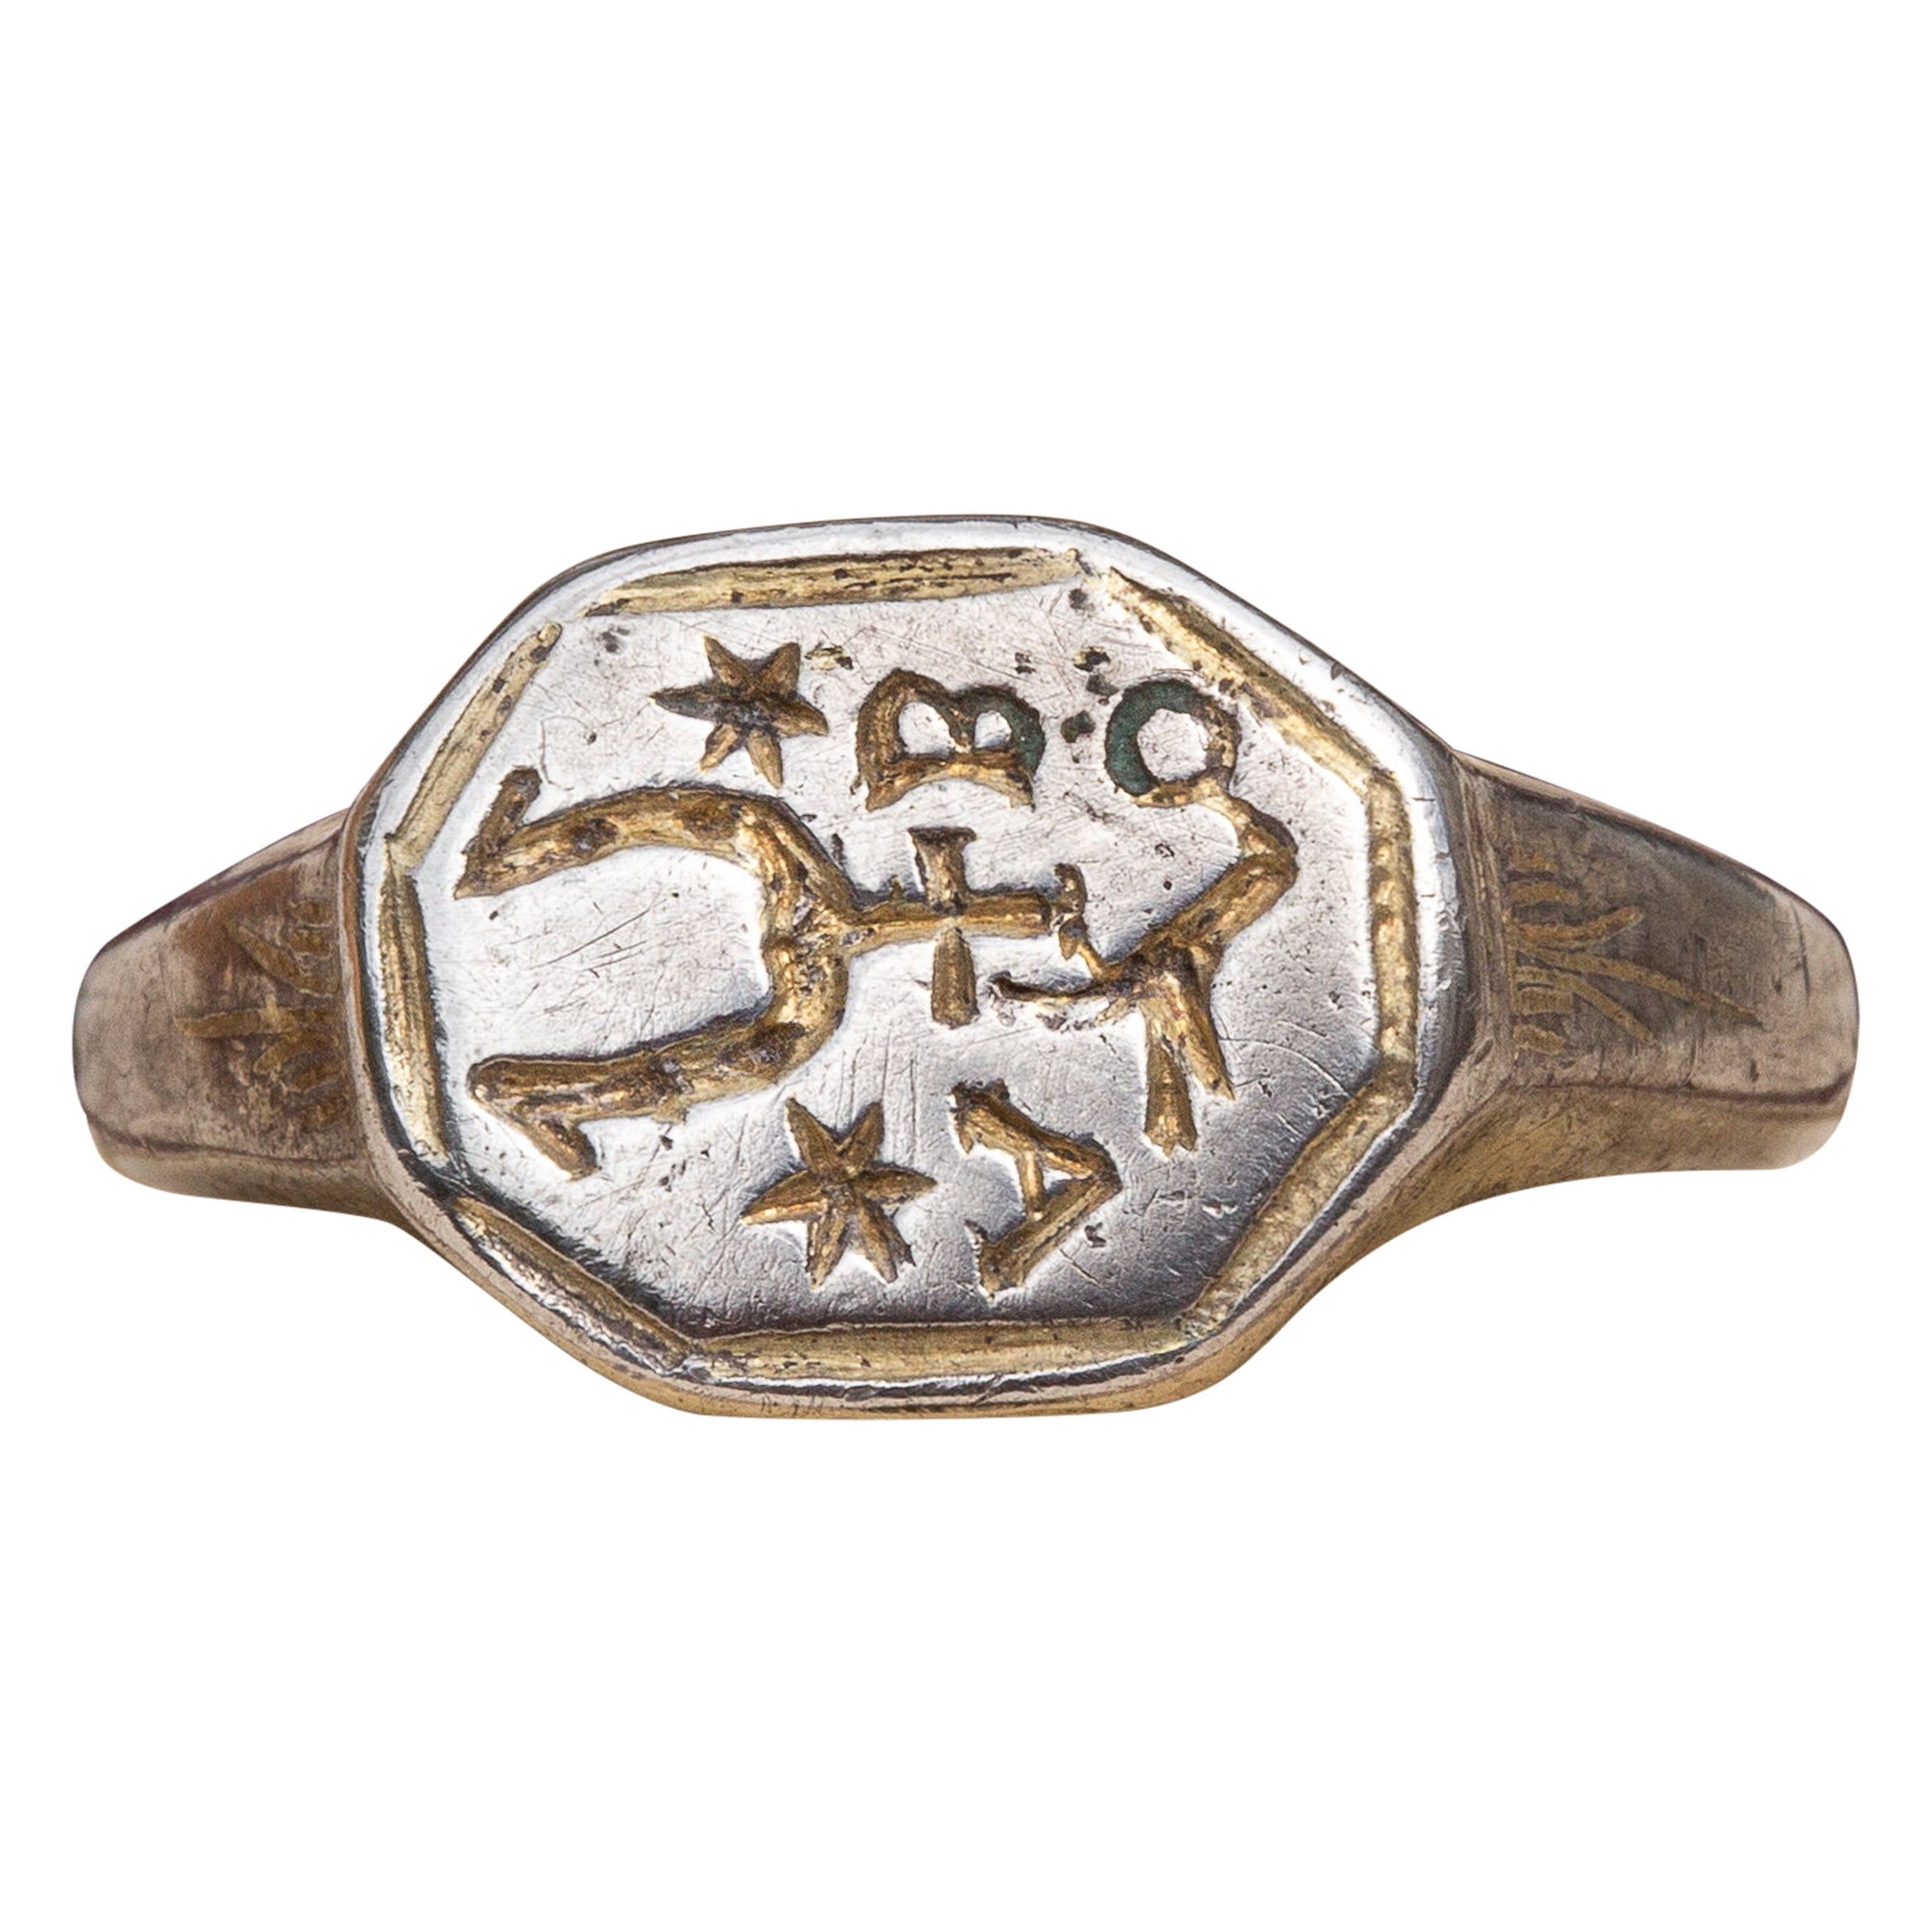 16th Century Silver Polish 'Ślepowron' Coat of Arms Signet Intaglio Ring